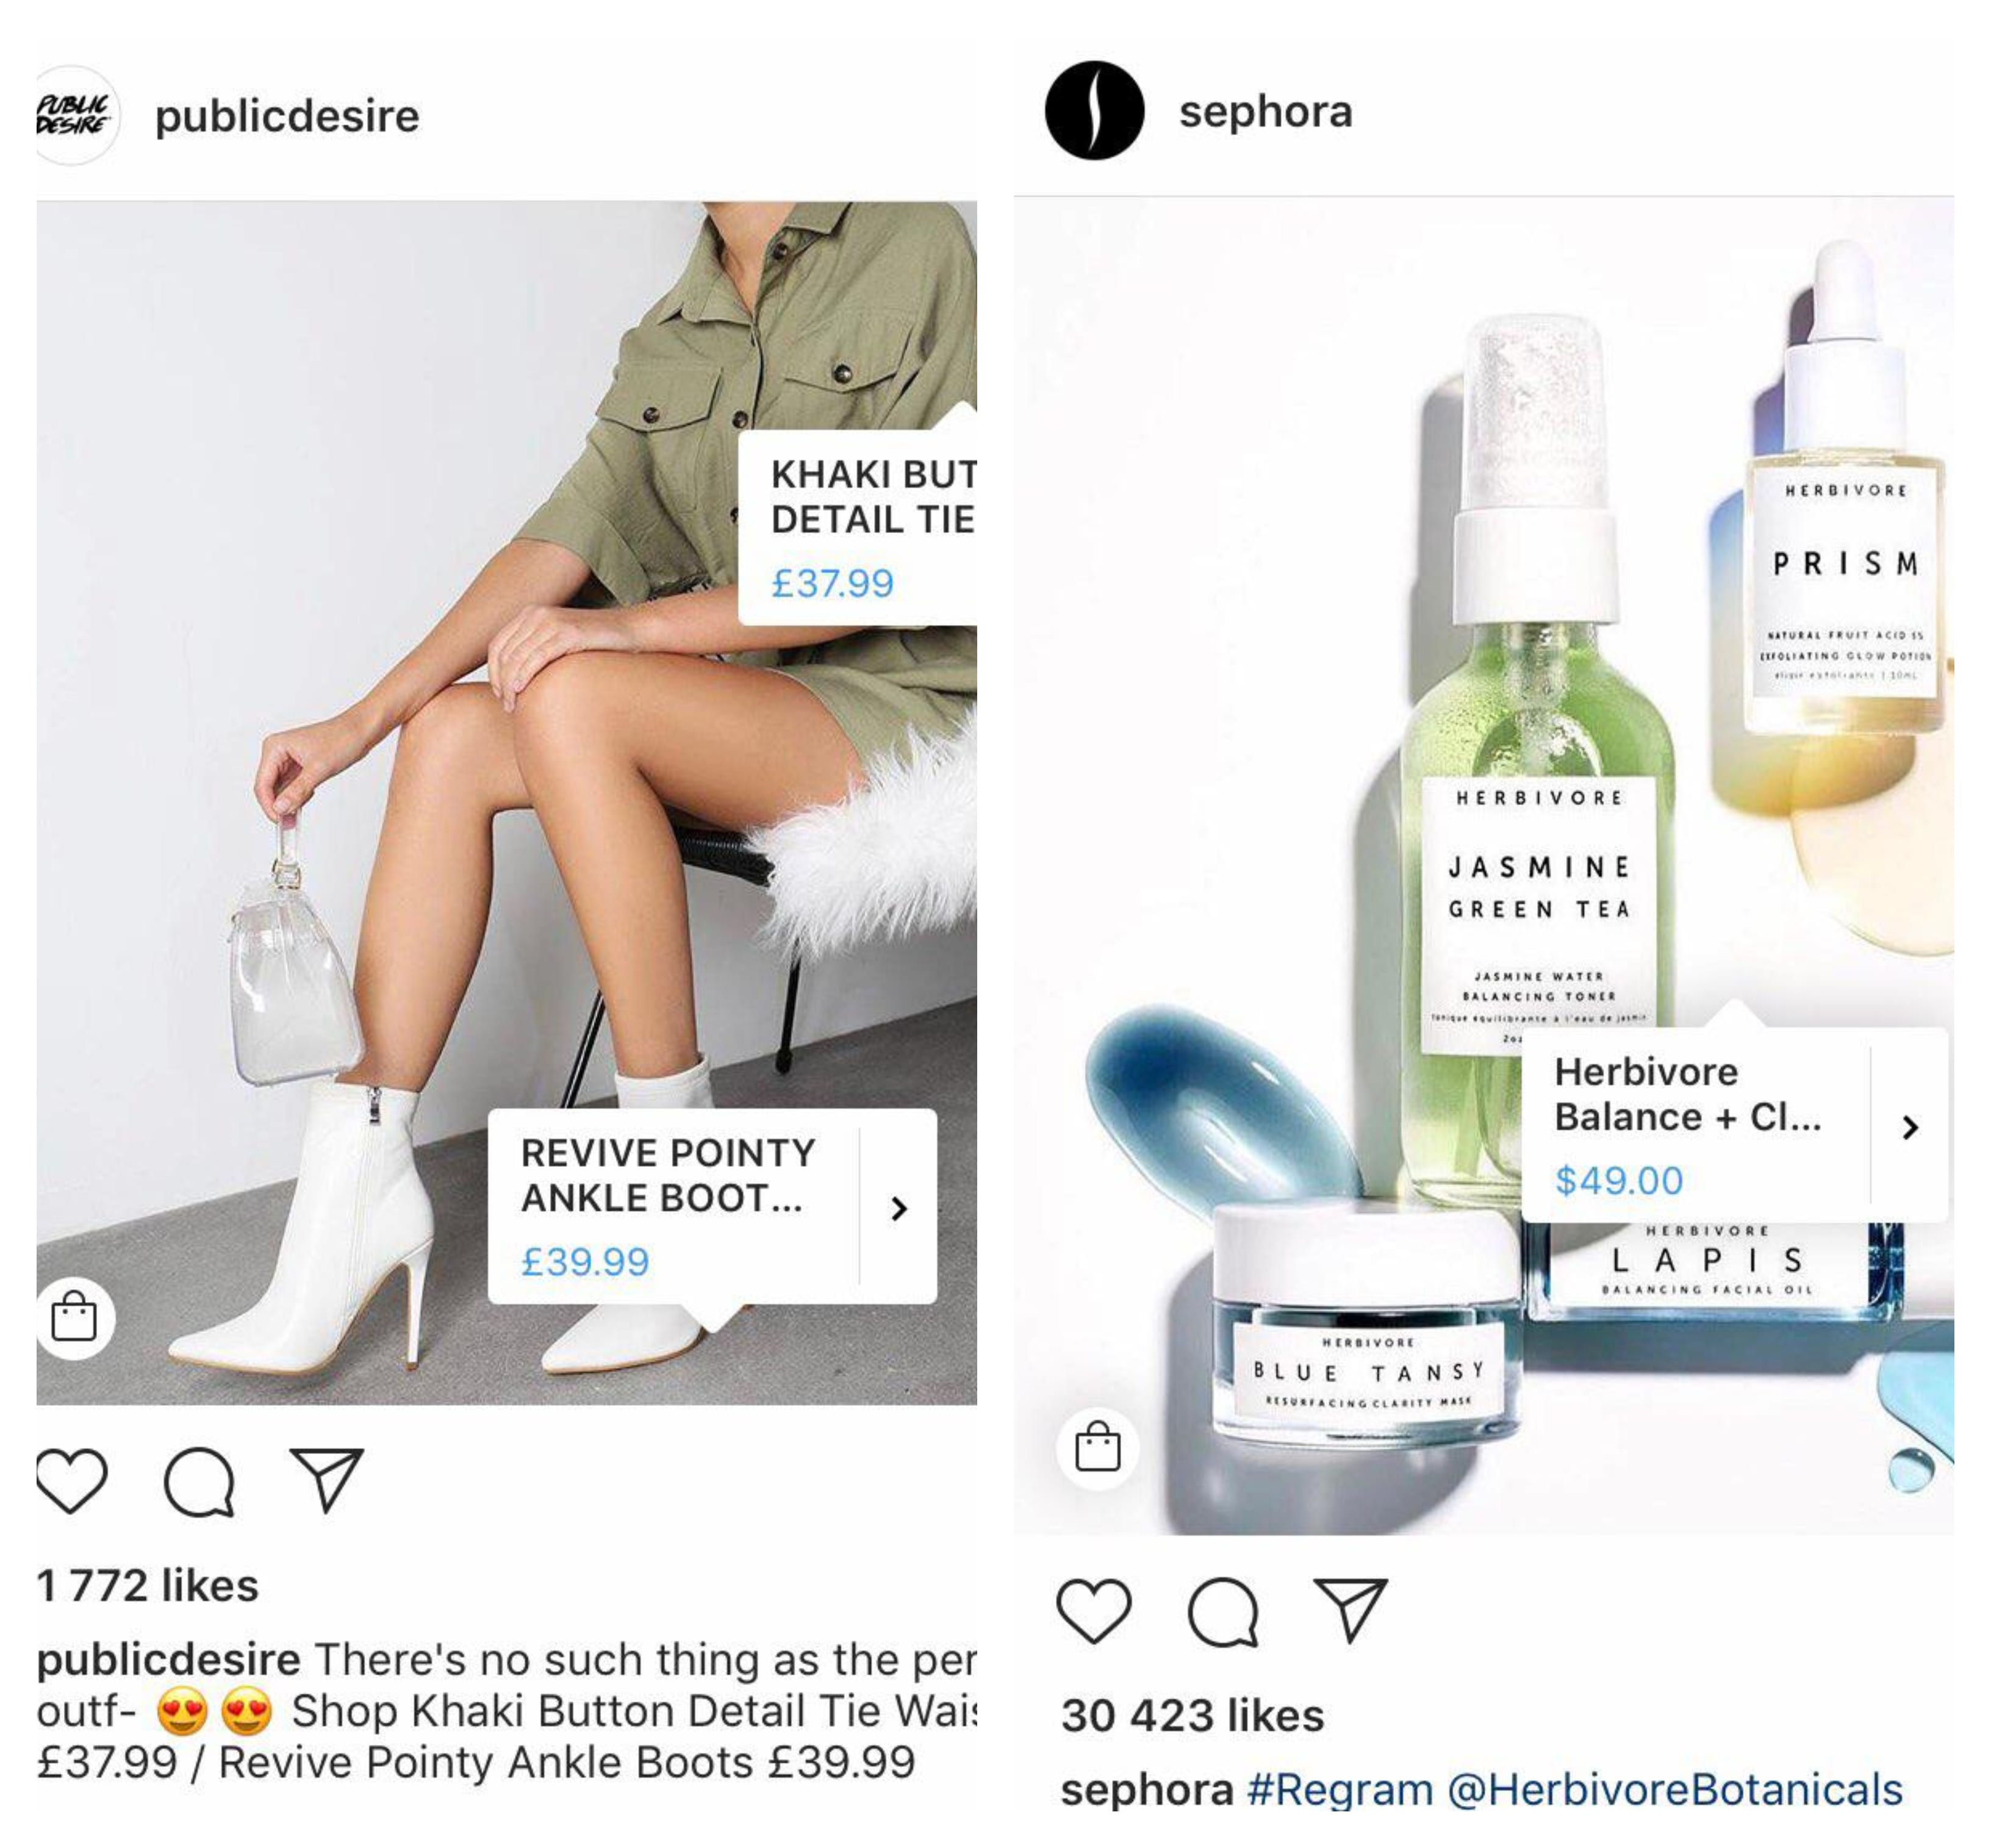 Public Desire and Sephora tagged Instagram posts